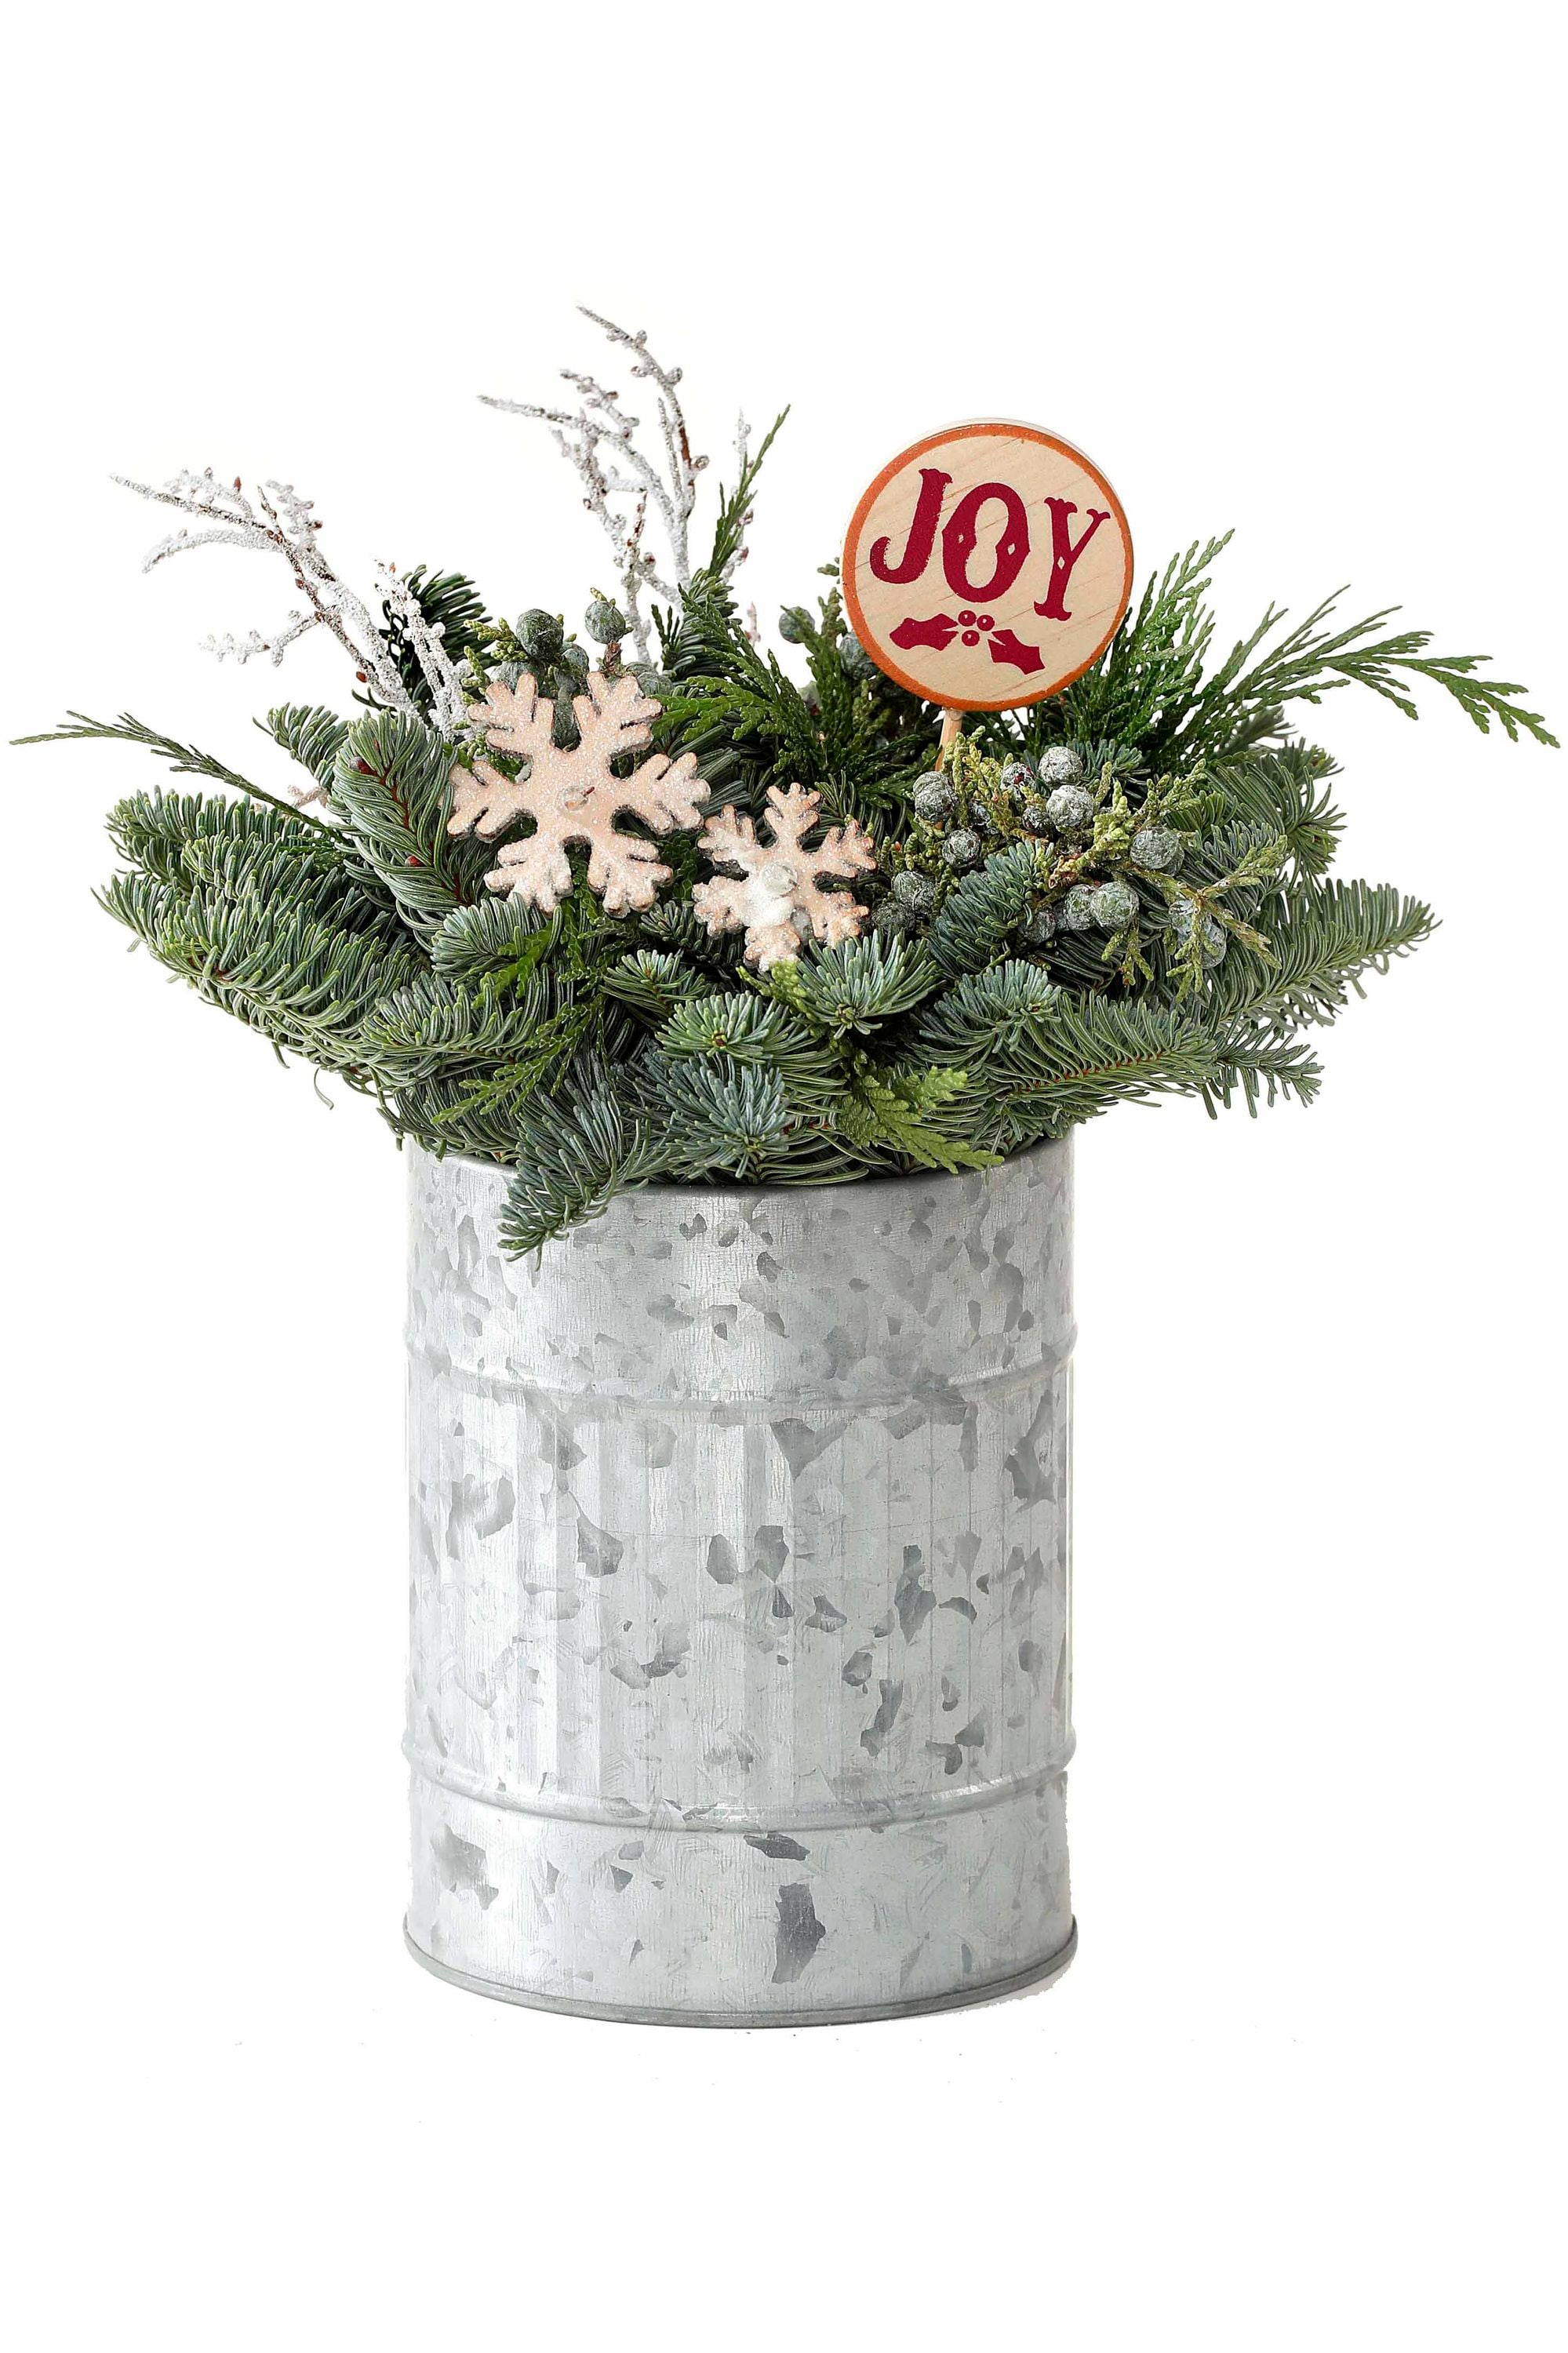 Fresh Christmas Potted Greenery at Lowes.com